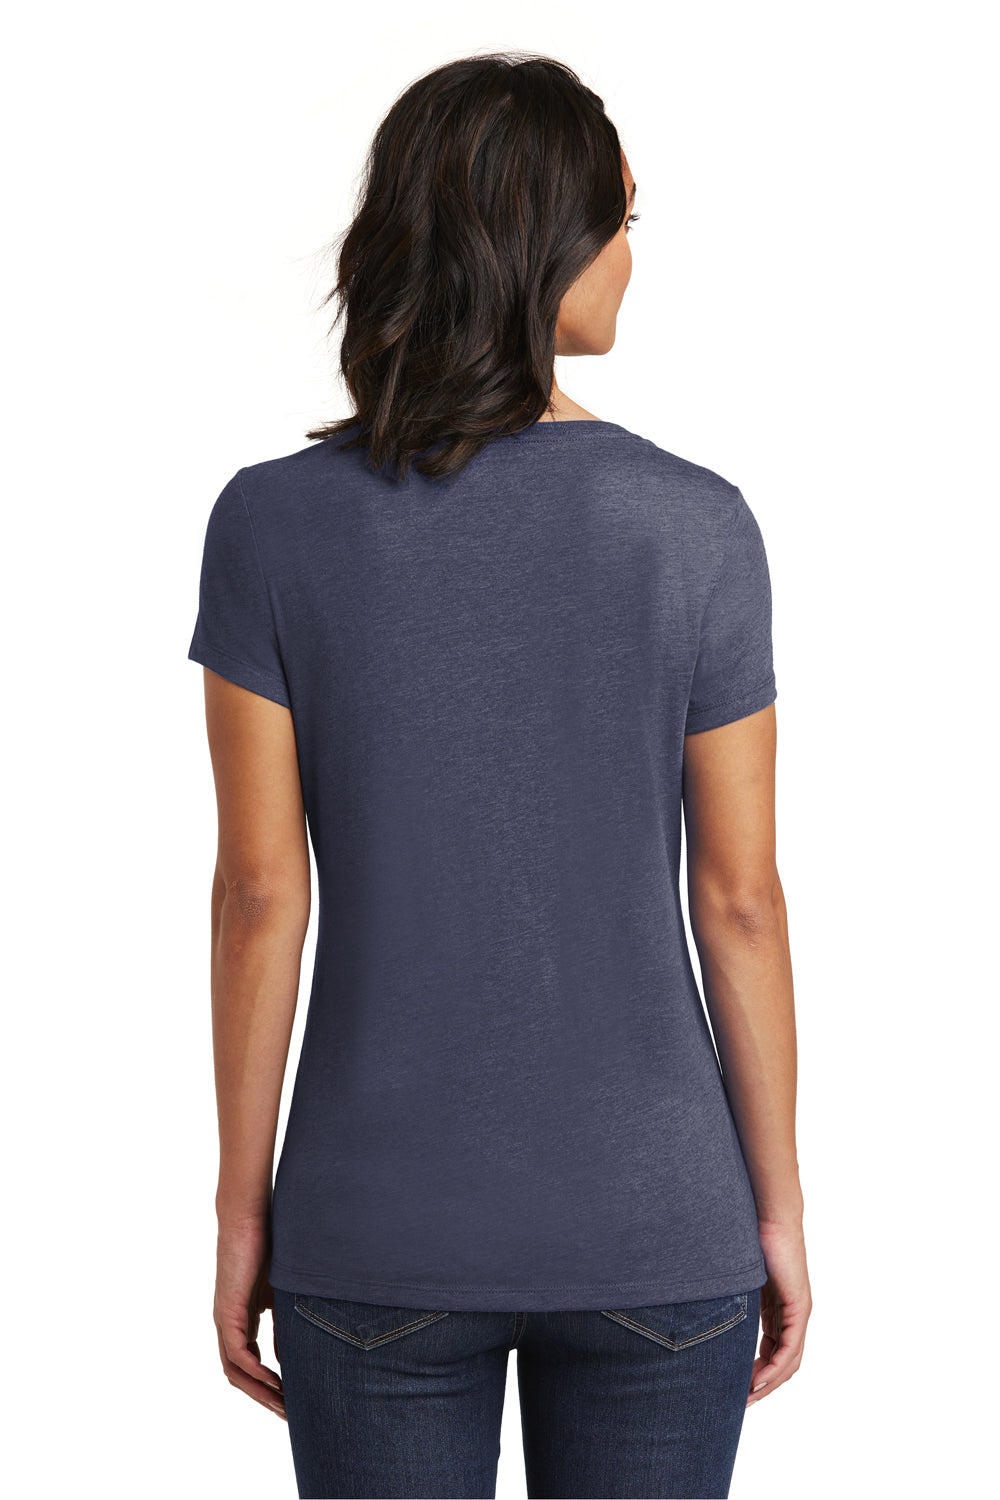 District DT6503 Womens Very Important Short Sleeve V-Neck T-Shirt Heather Navy Blue Back